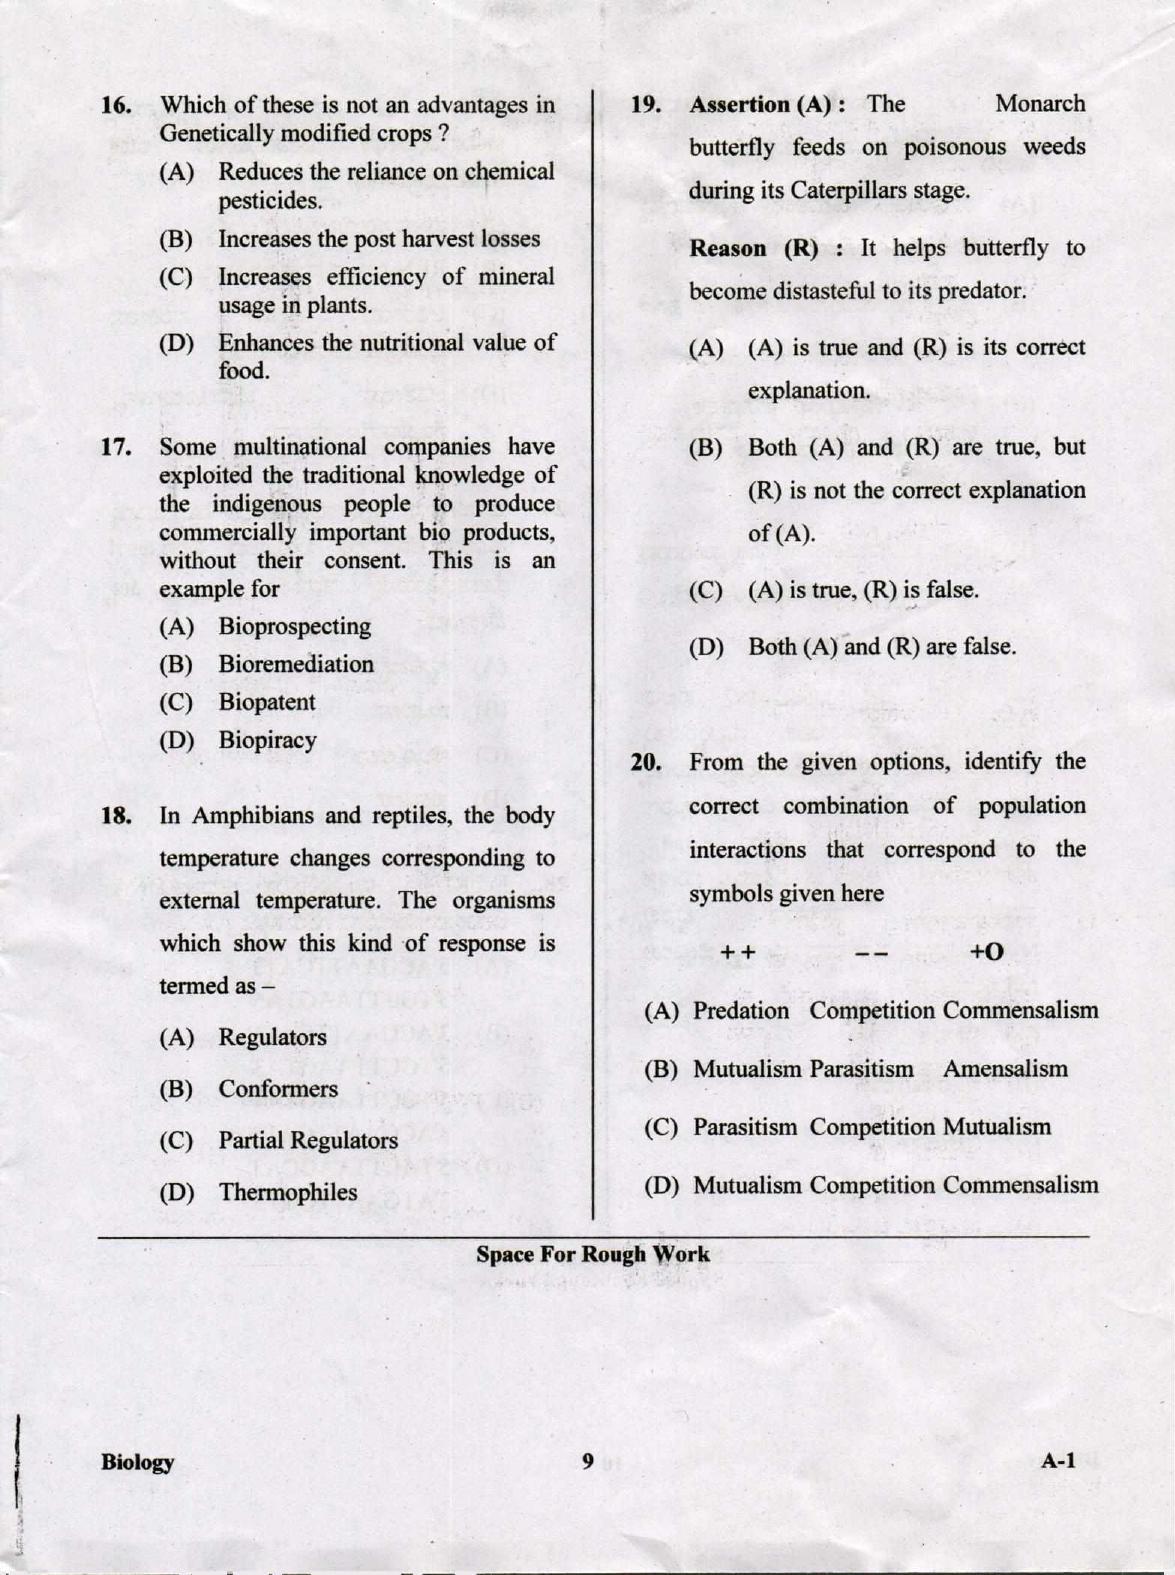 KCET Biology 2019 Question Papers - Page 9